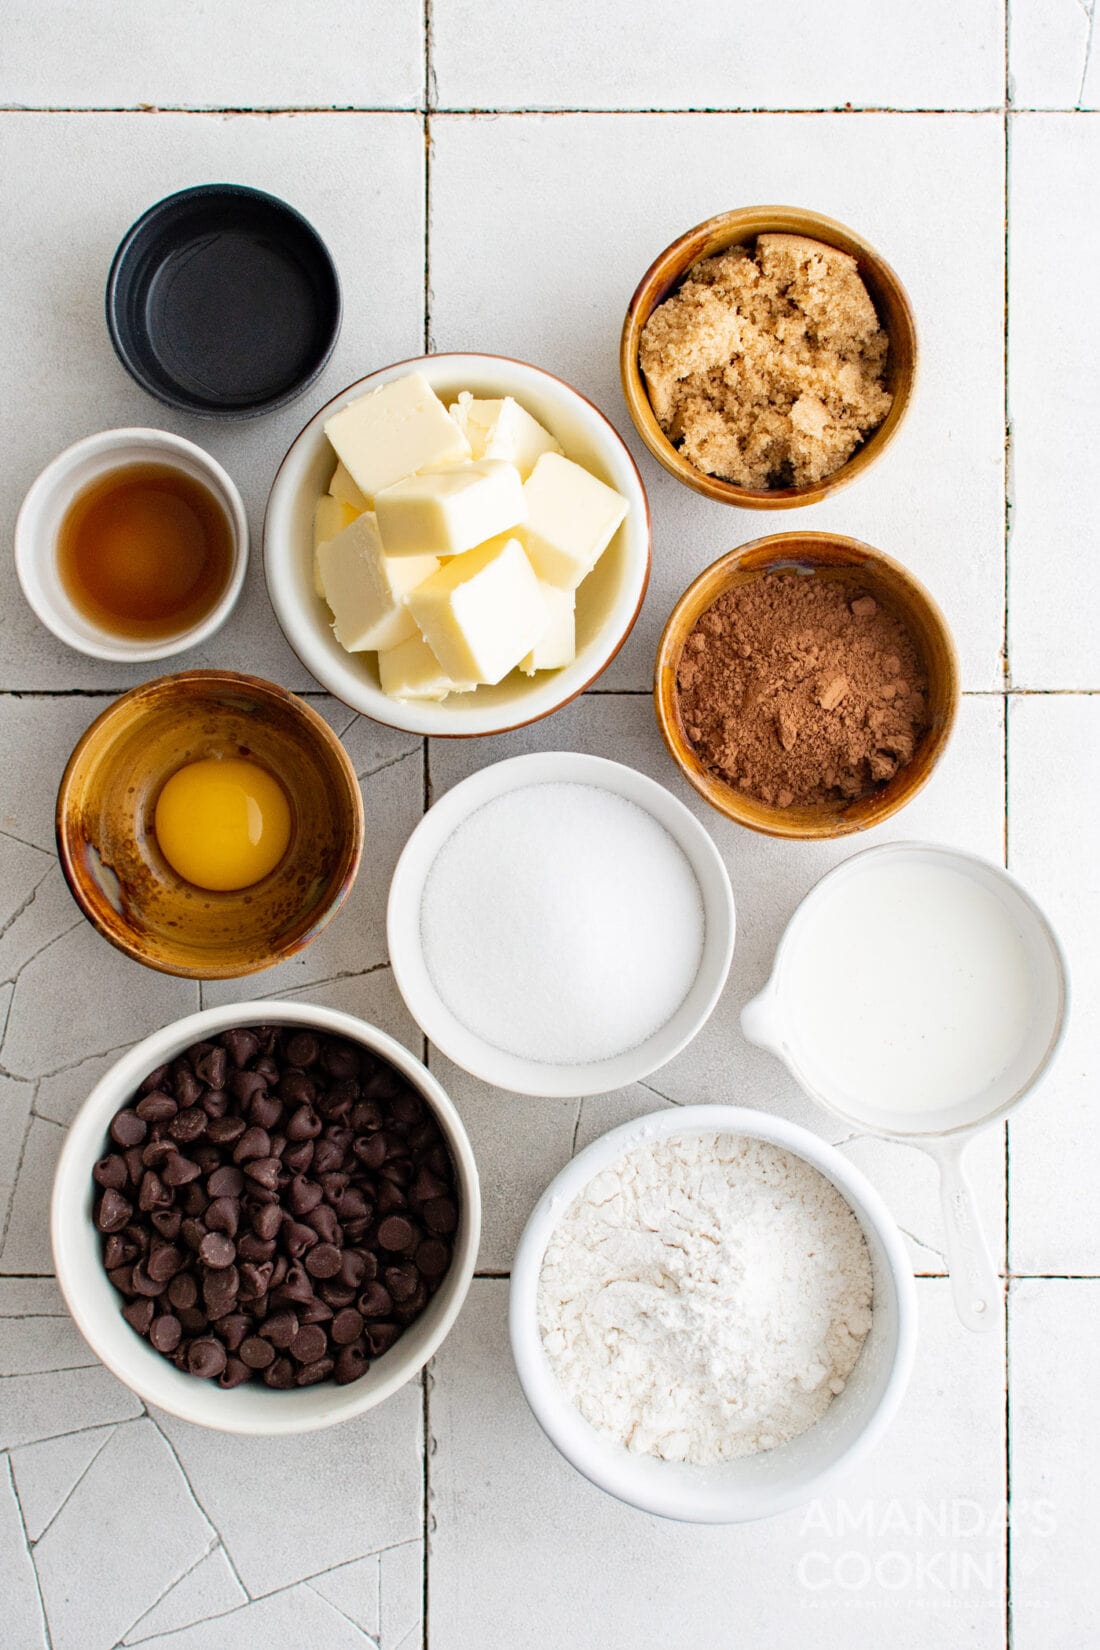 ingredients for Chocolate Thumbprint Cookies